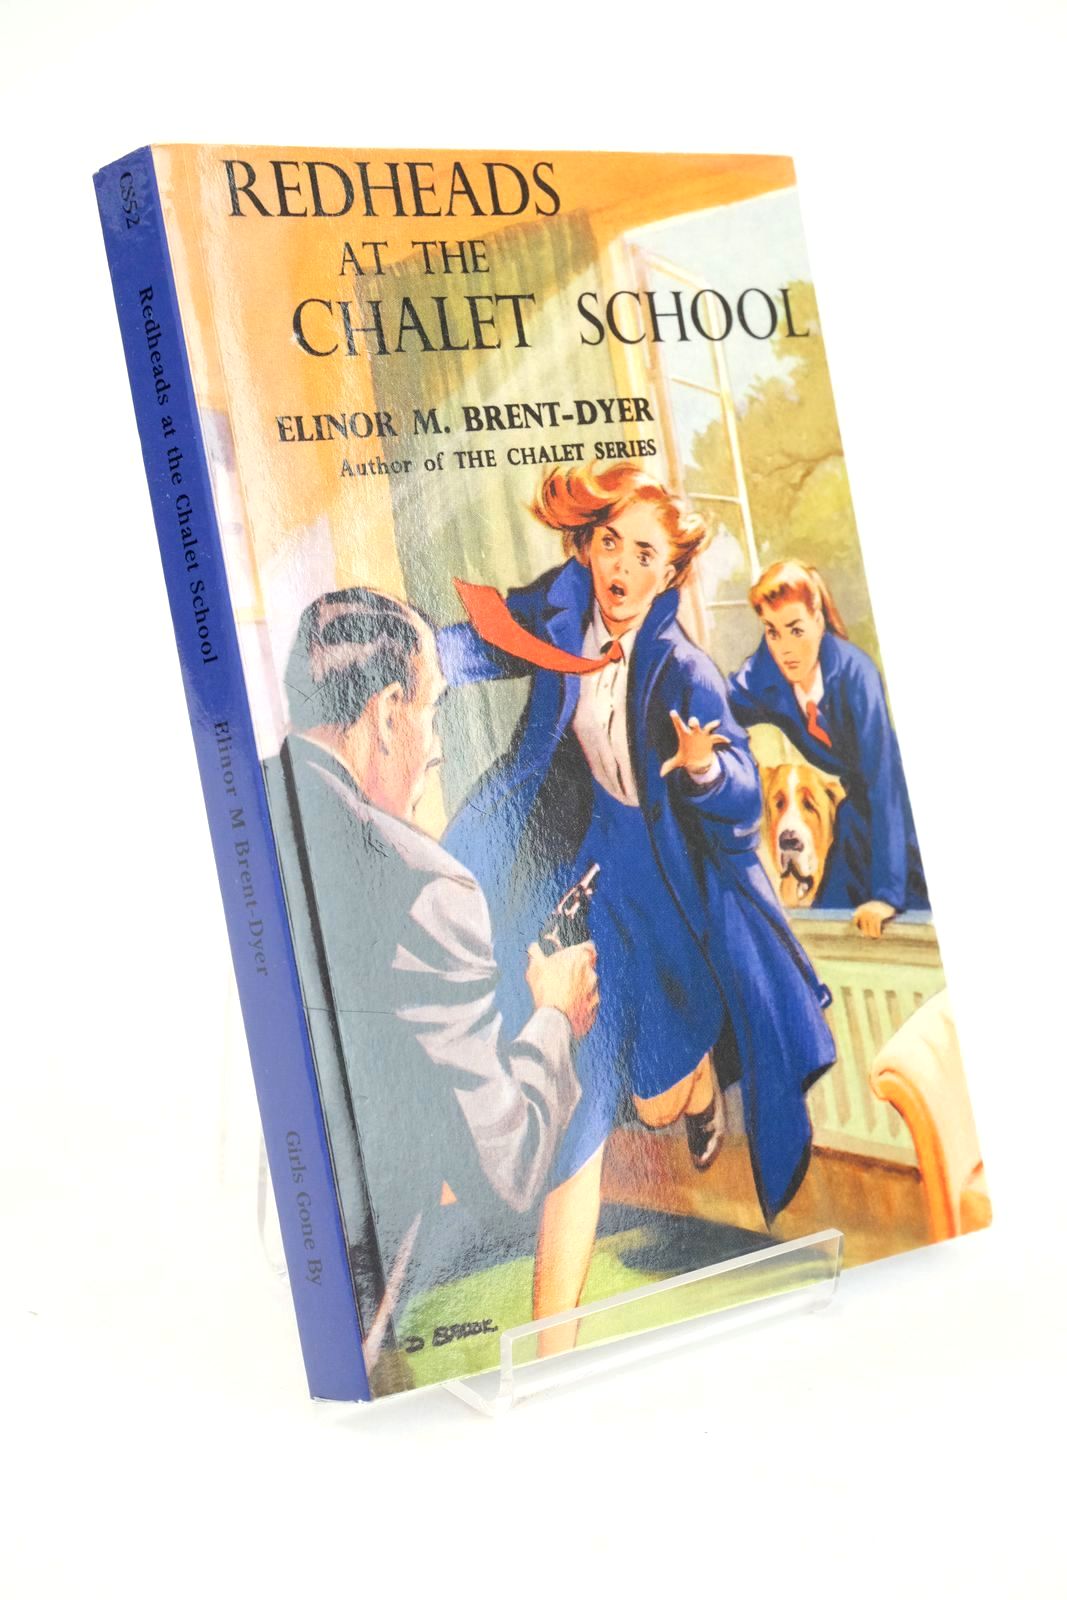 Photo of REDHEADS AT THE CHALET SCHOOL written by Brent-Dyer, Elinor M. published by Girls Gone By (STOCK CODE: 1325483)  for sale by Stella & Rose's Books